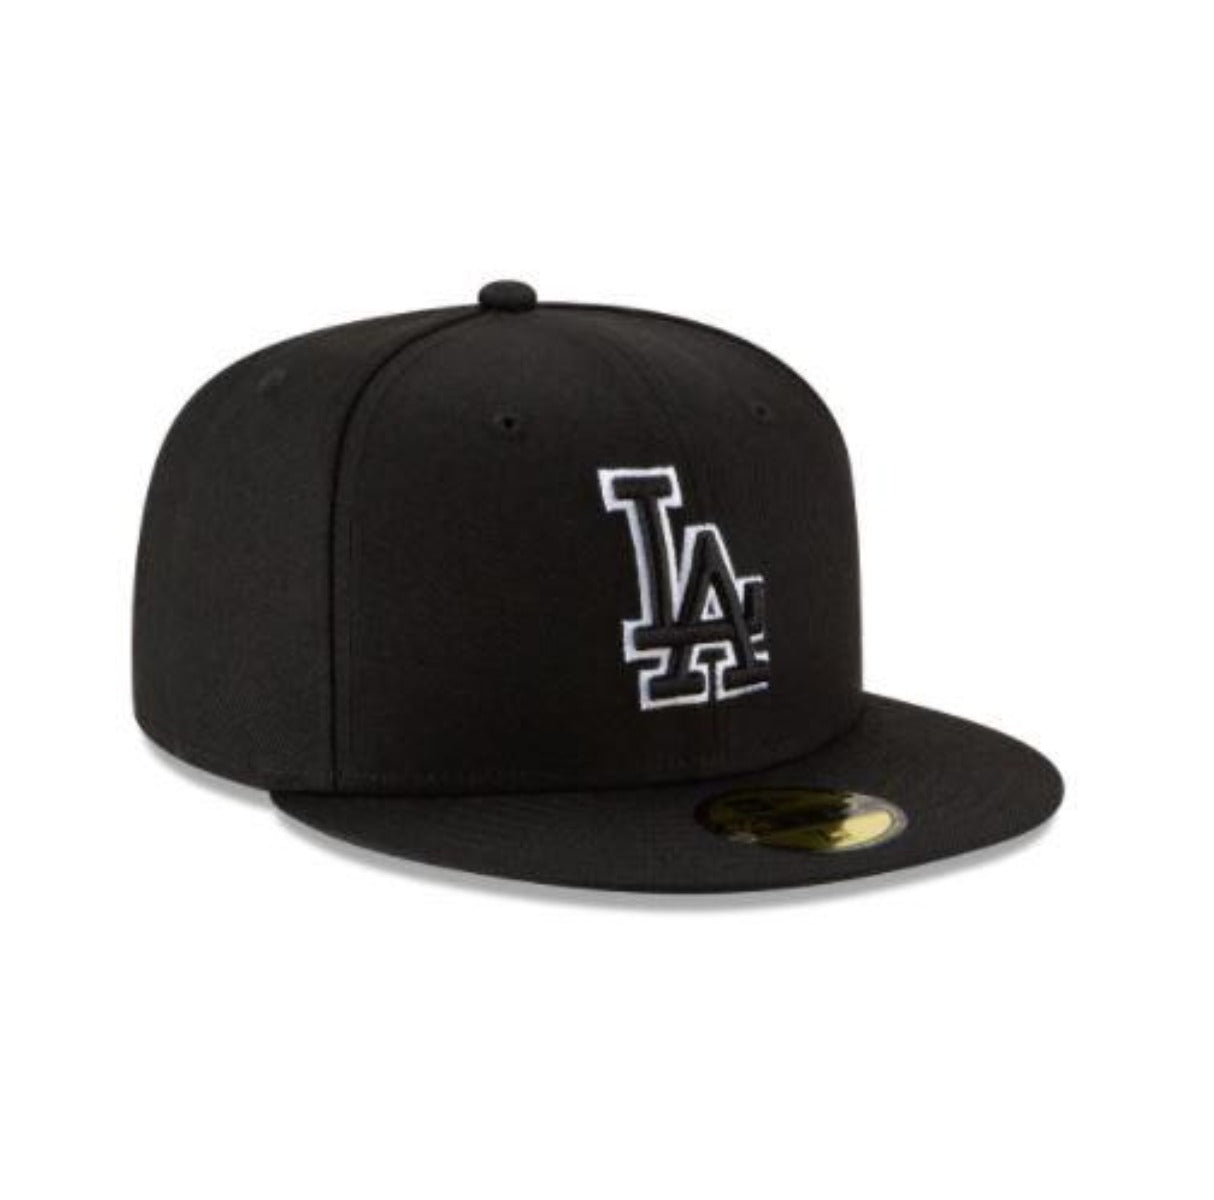 Los Angeles Dodgers NEW ERA BASIC COLLECTION BLACK OUTLINE FITTED 59FIFTY-BLACK AND WHITE